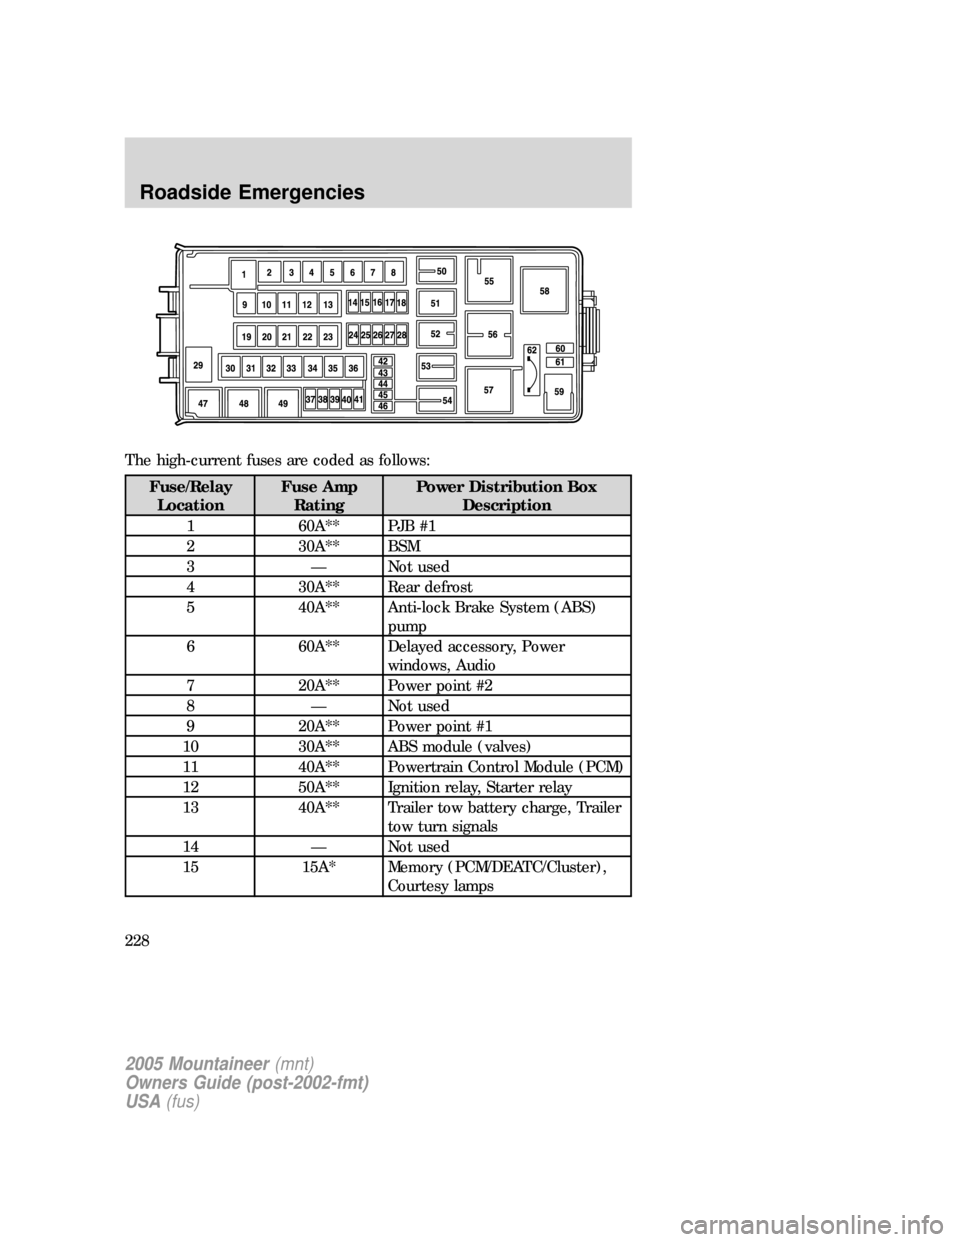 Mercury Mountaineer 2005  Owners Manuals The high-current fuses are coded as follows:
Fuse/Relay
LocationFuse Amp
RatingPower Distribution Box
Description
1 60A** PJB #1
2 30A** BSM
3 — Not used
4 30A** Rear defrost
5 40A** Anti-lock Brake